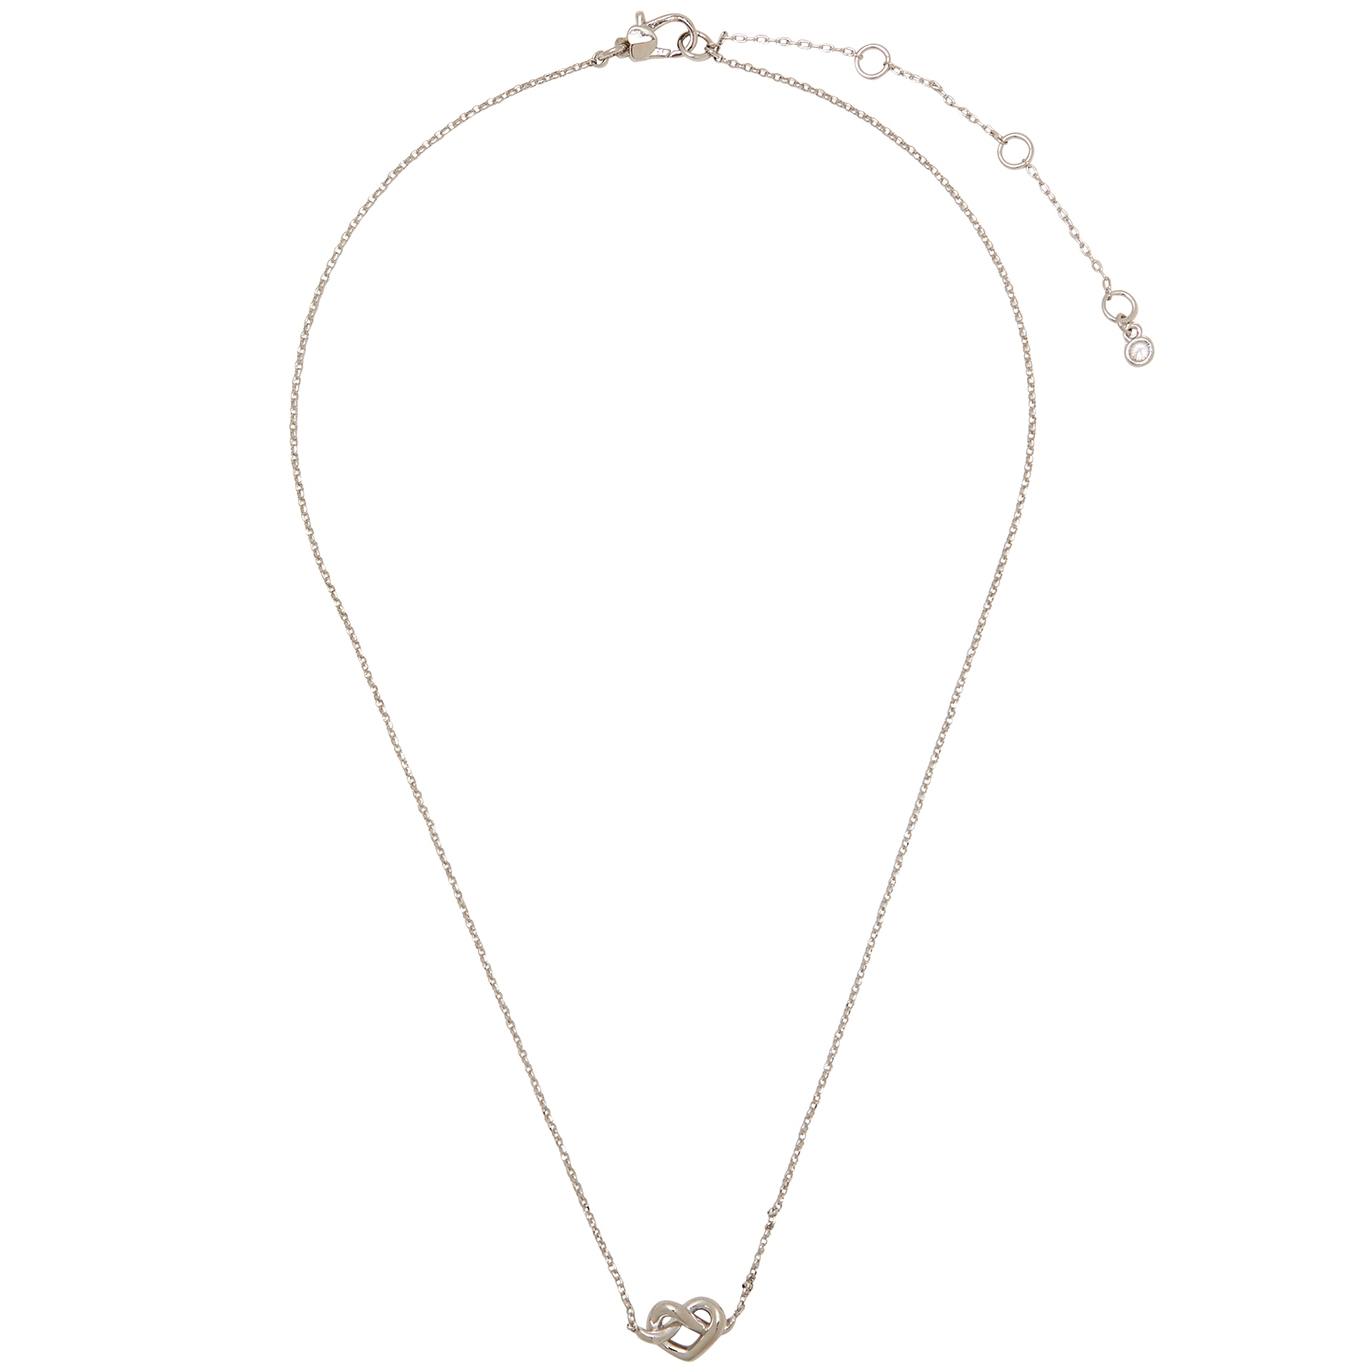 Kate Spade New York love me knot silver-tone necklace - one size